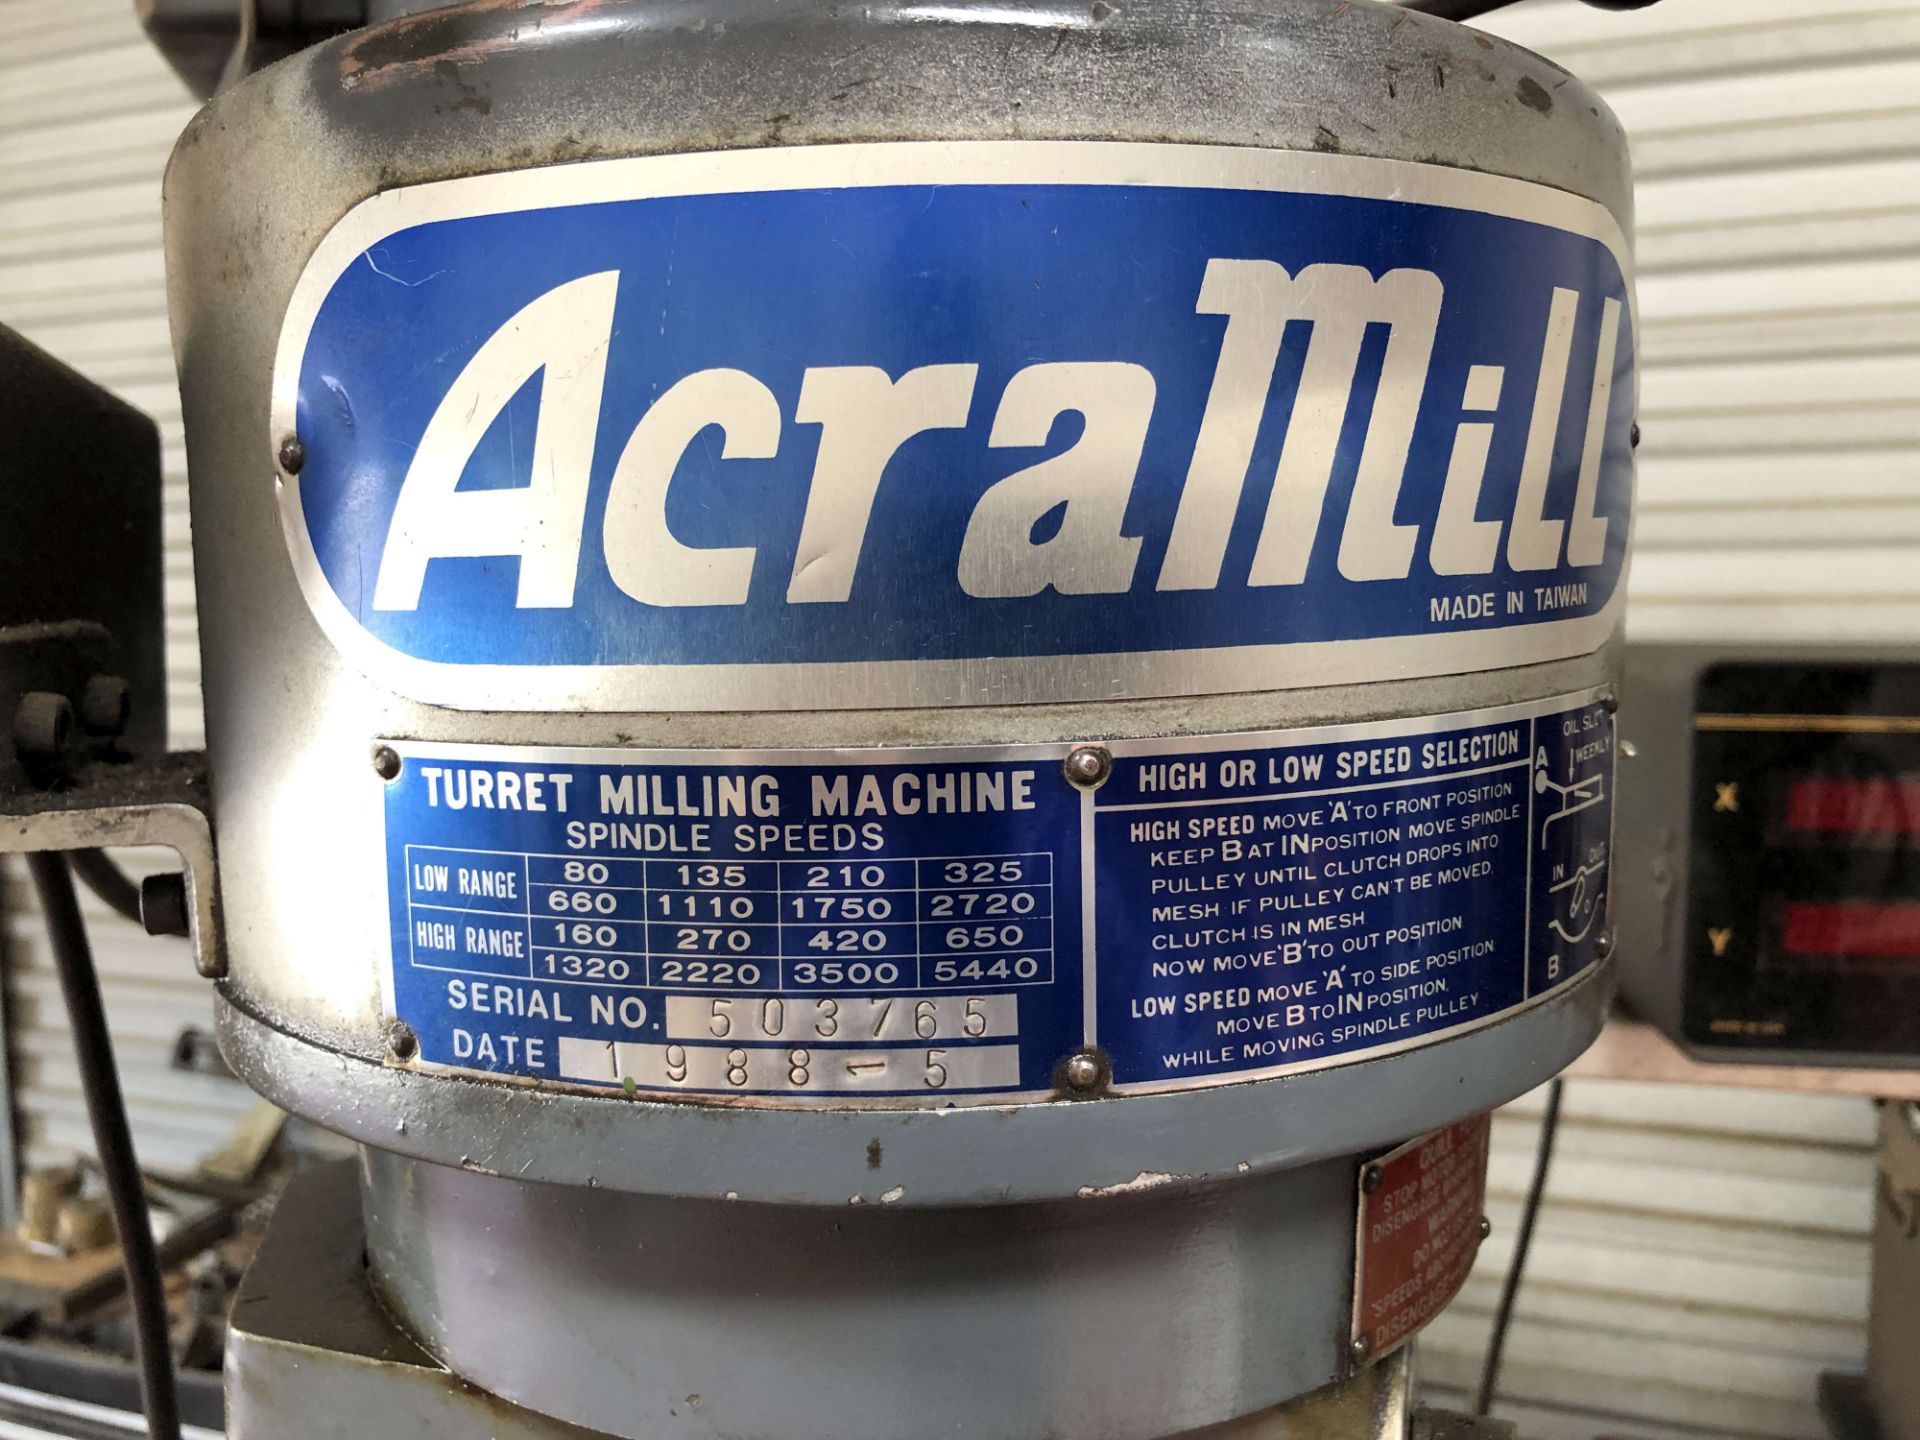 AcraMill Vertical Milling Machine, 9" x 42" Table, Table Power Feed, 2 HP, 80 to 5440 RPM, Sargon - Image 8 of 9